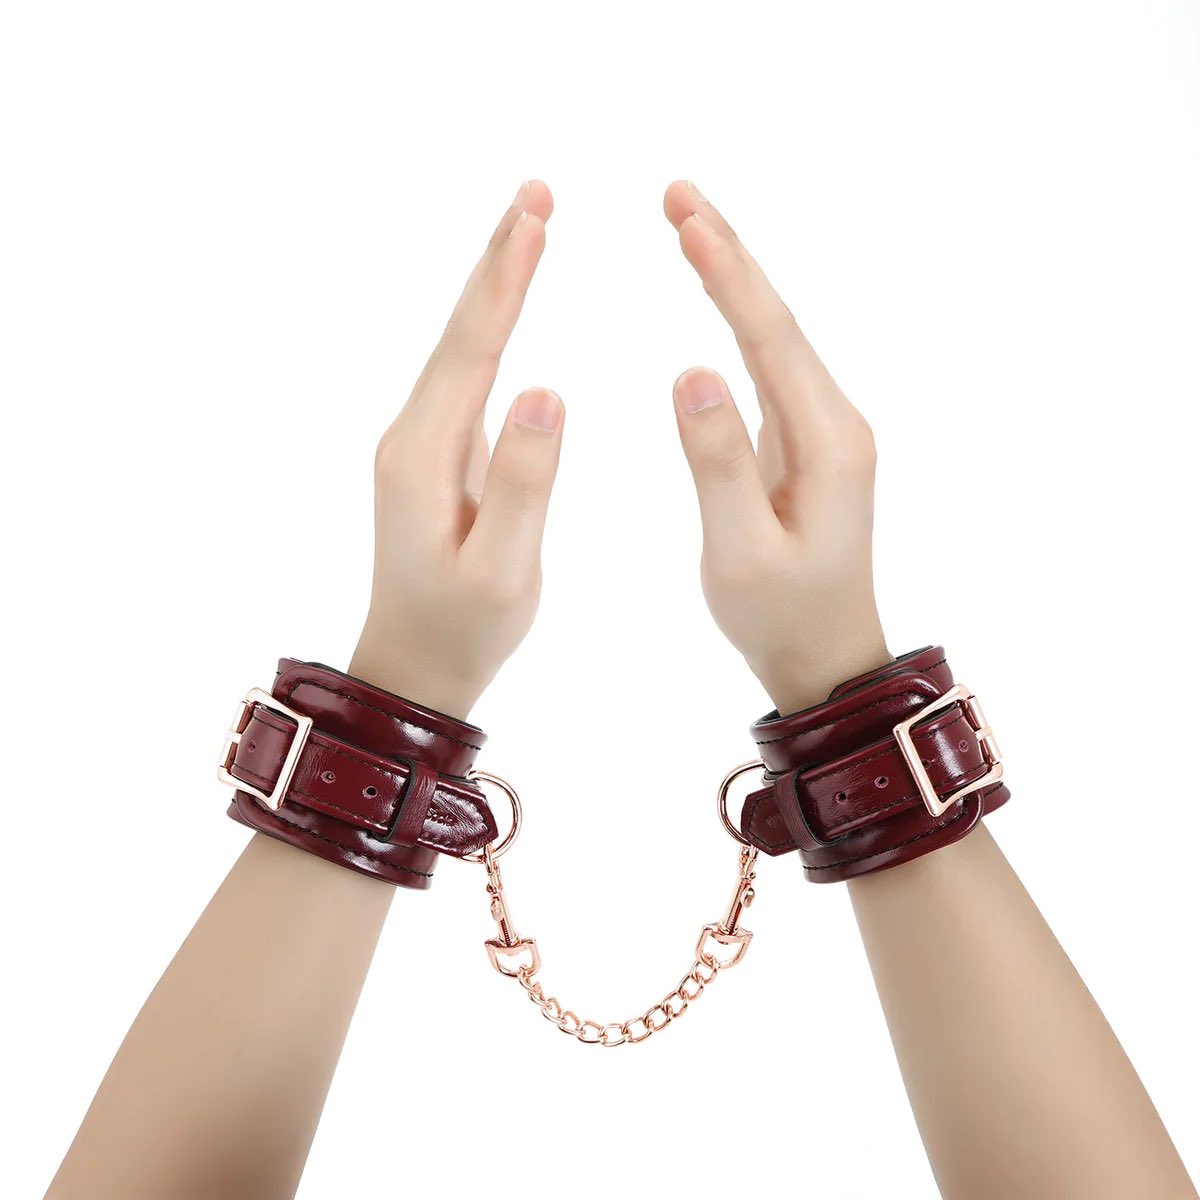 The Burgundy Leather Cuffs with Rose Gold Hardware on a model's wrists.